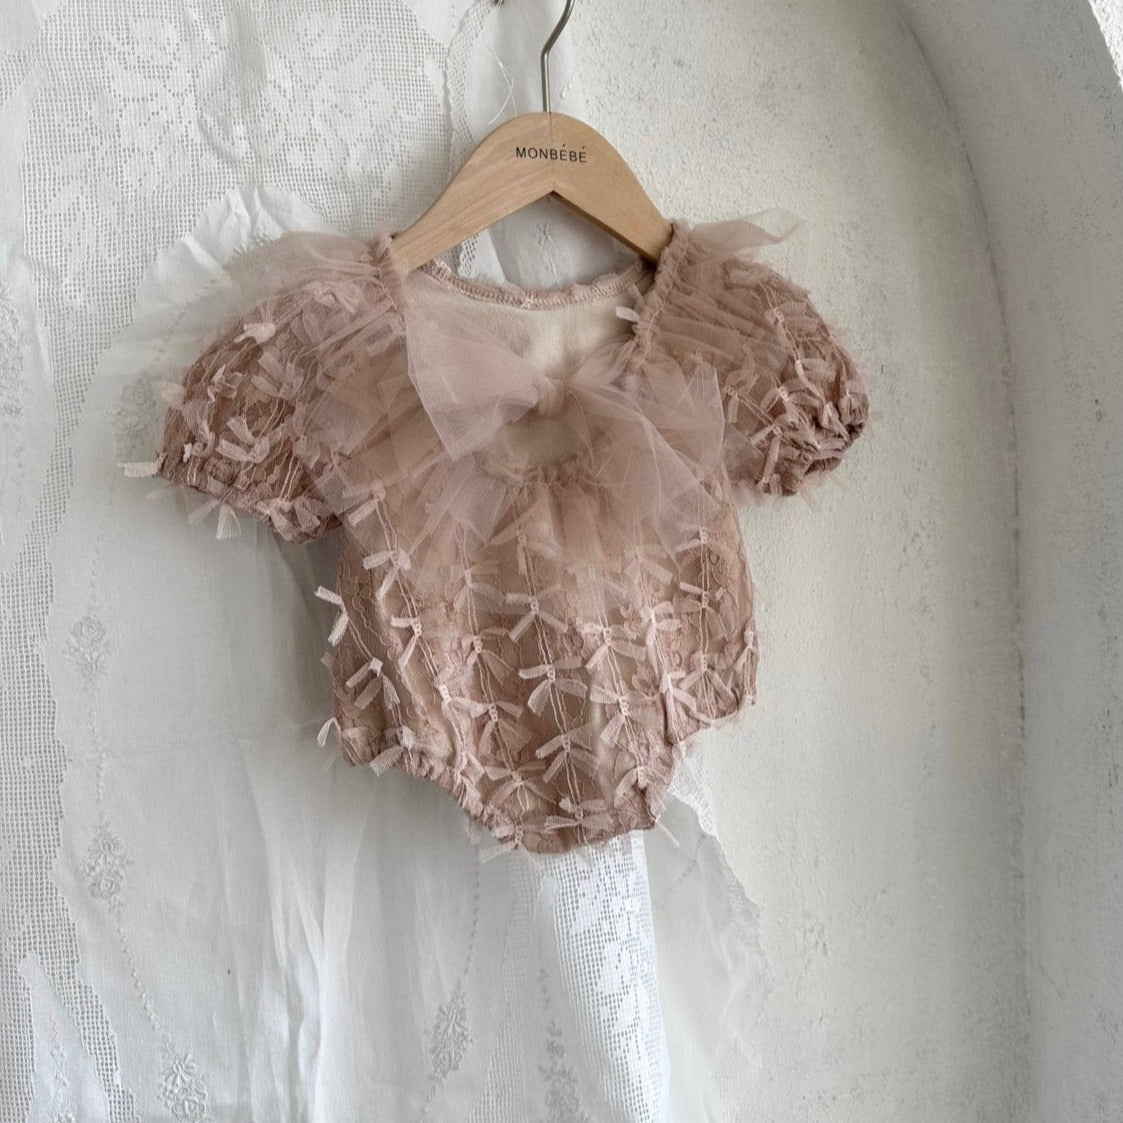 Baby Monbebe 3D Lace Tie Back Romper (0-24m) - Dusty Pink - AT NOON STORE